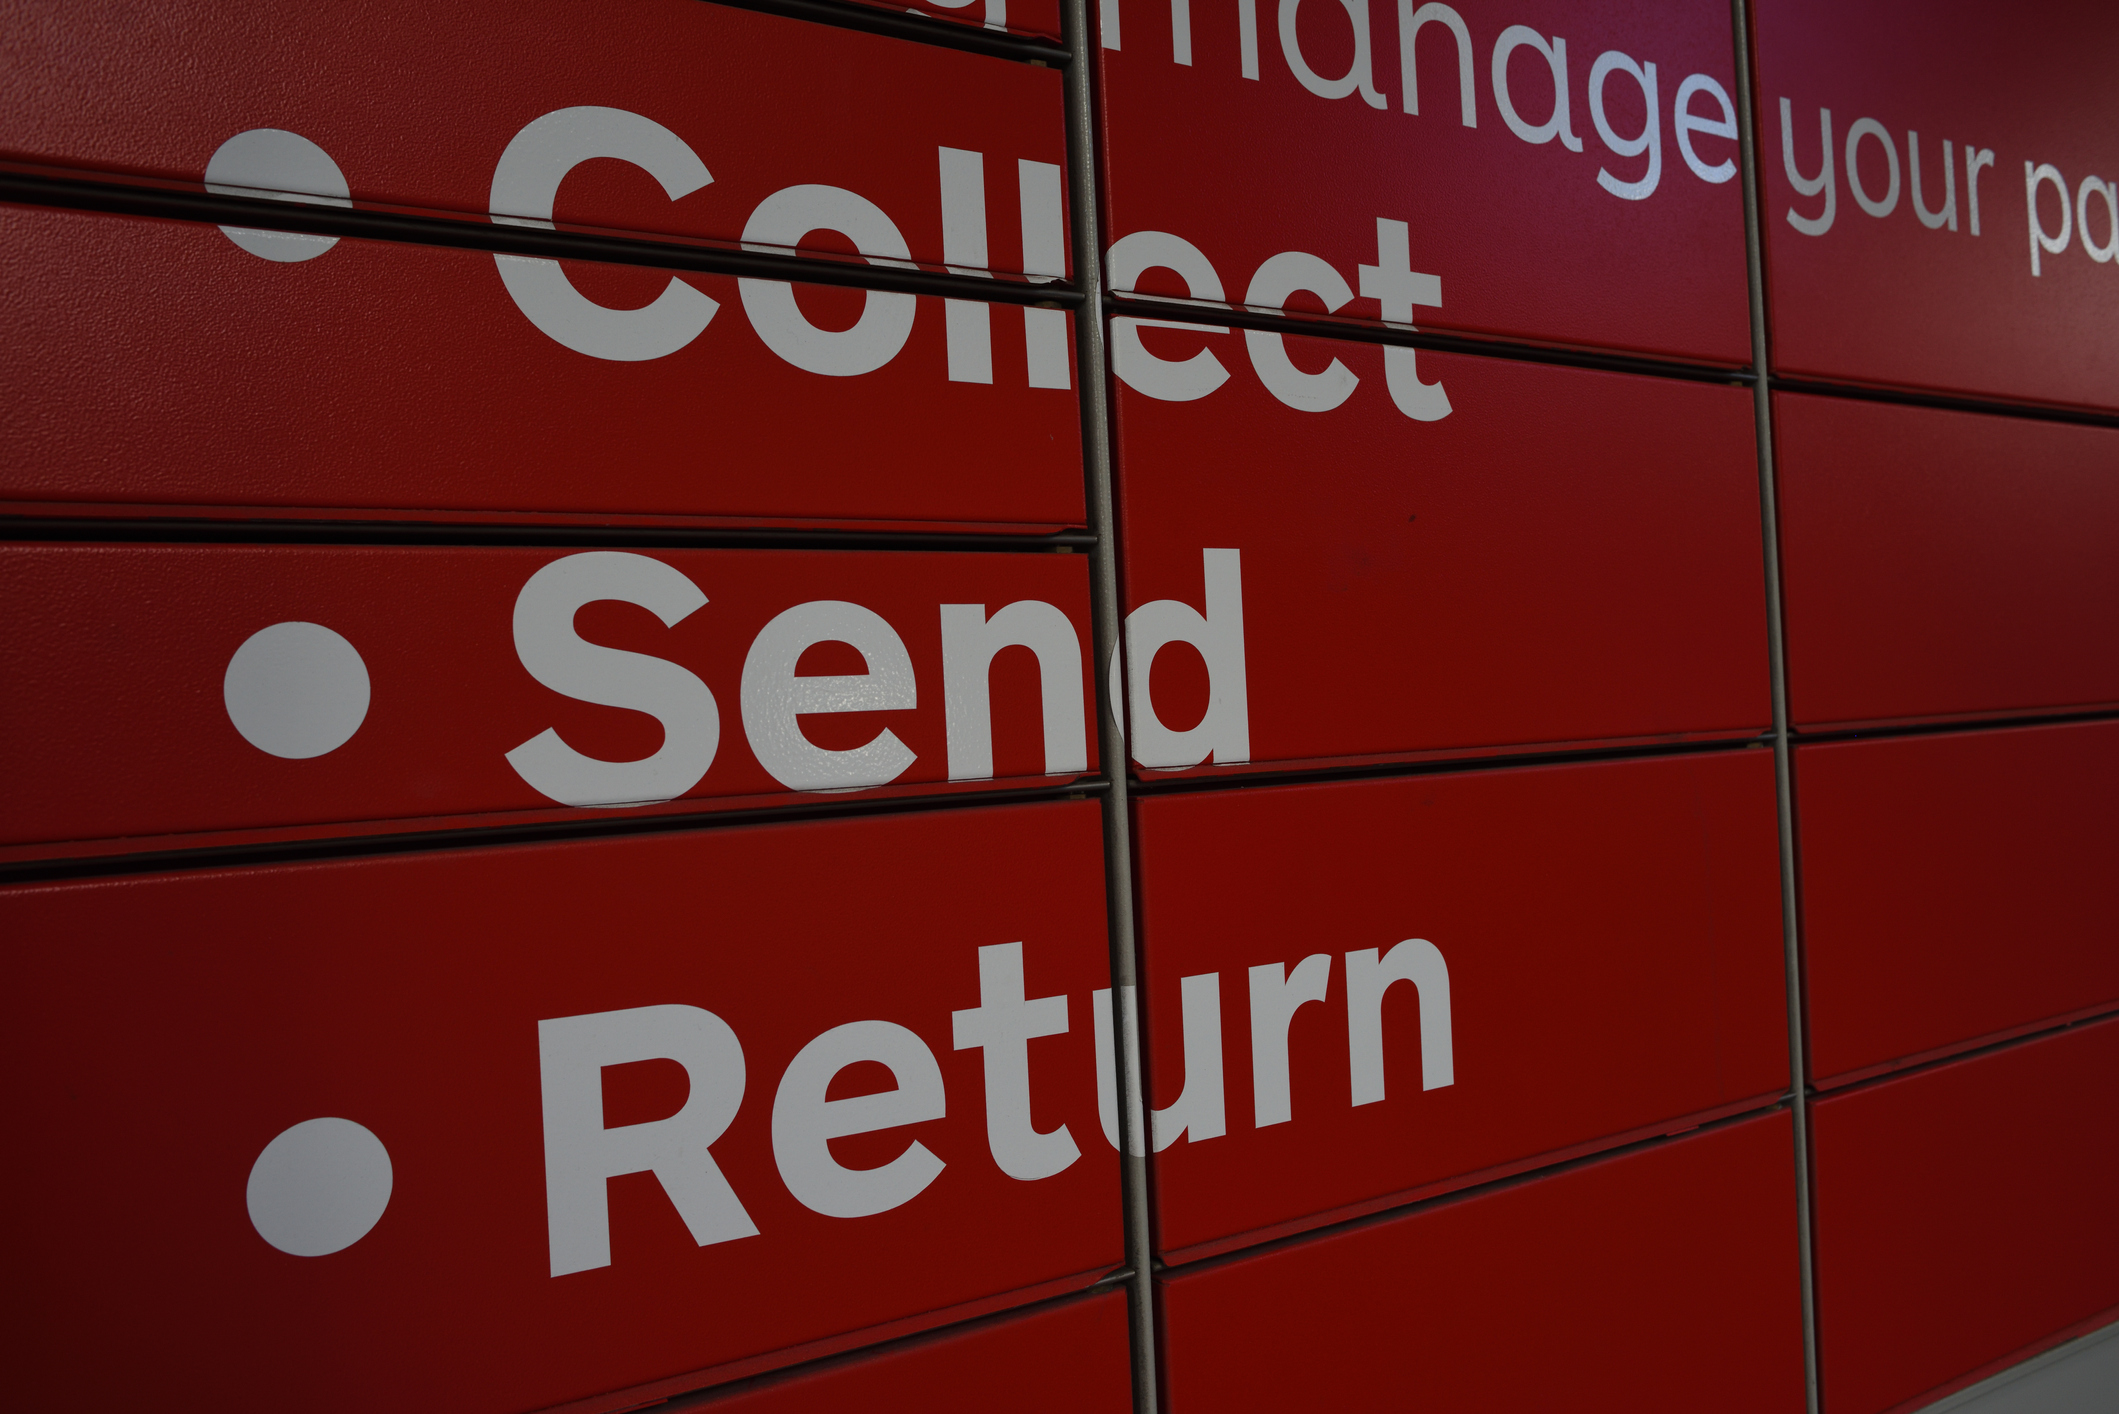 We love online shopping but are change-rooms in post offices going too far?